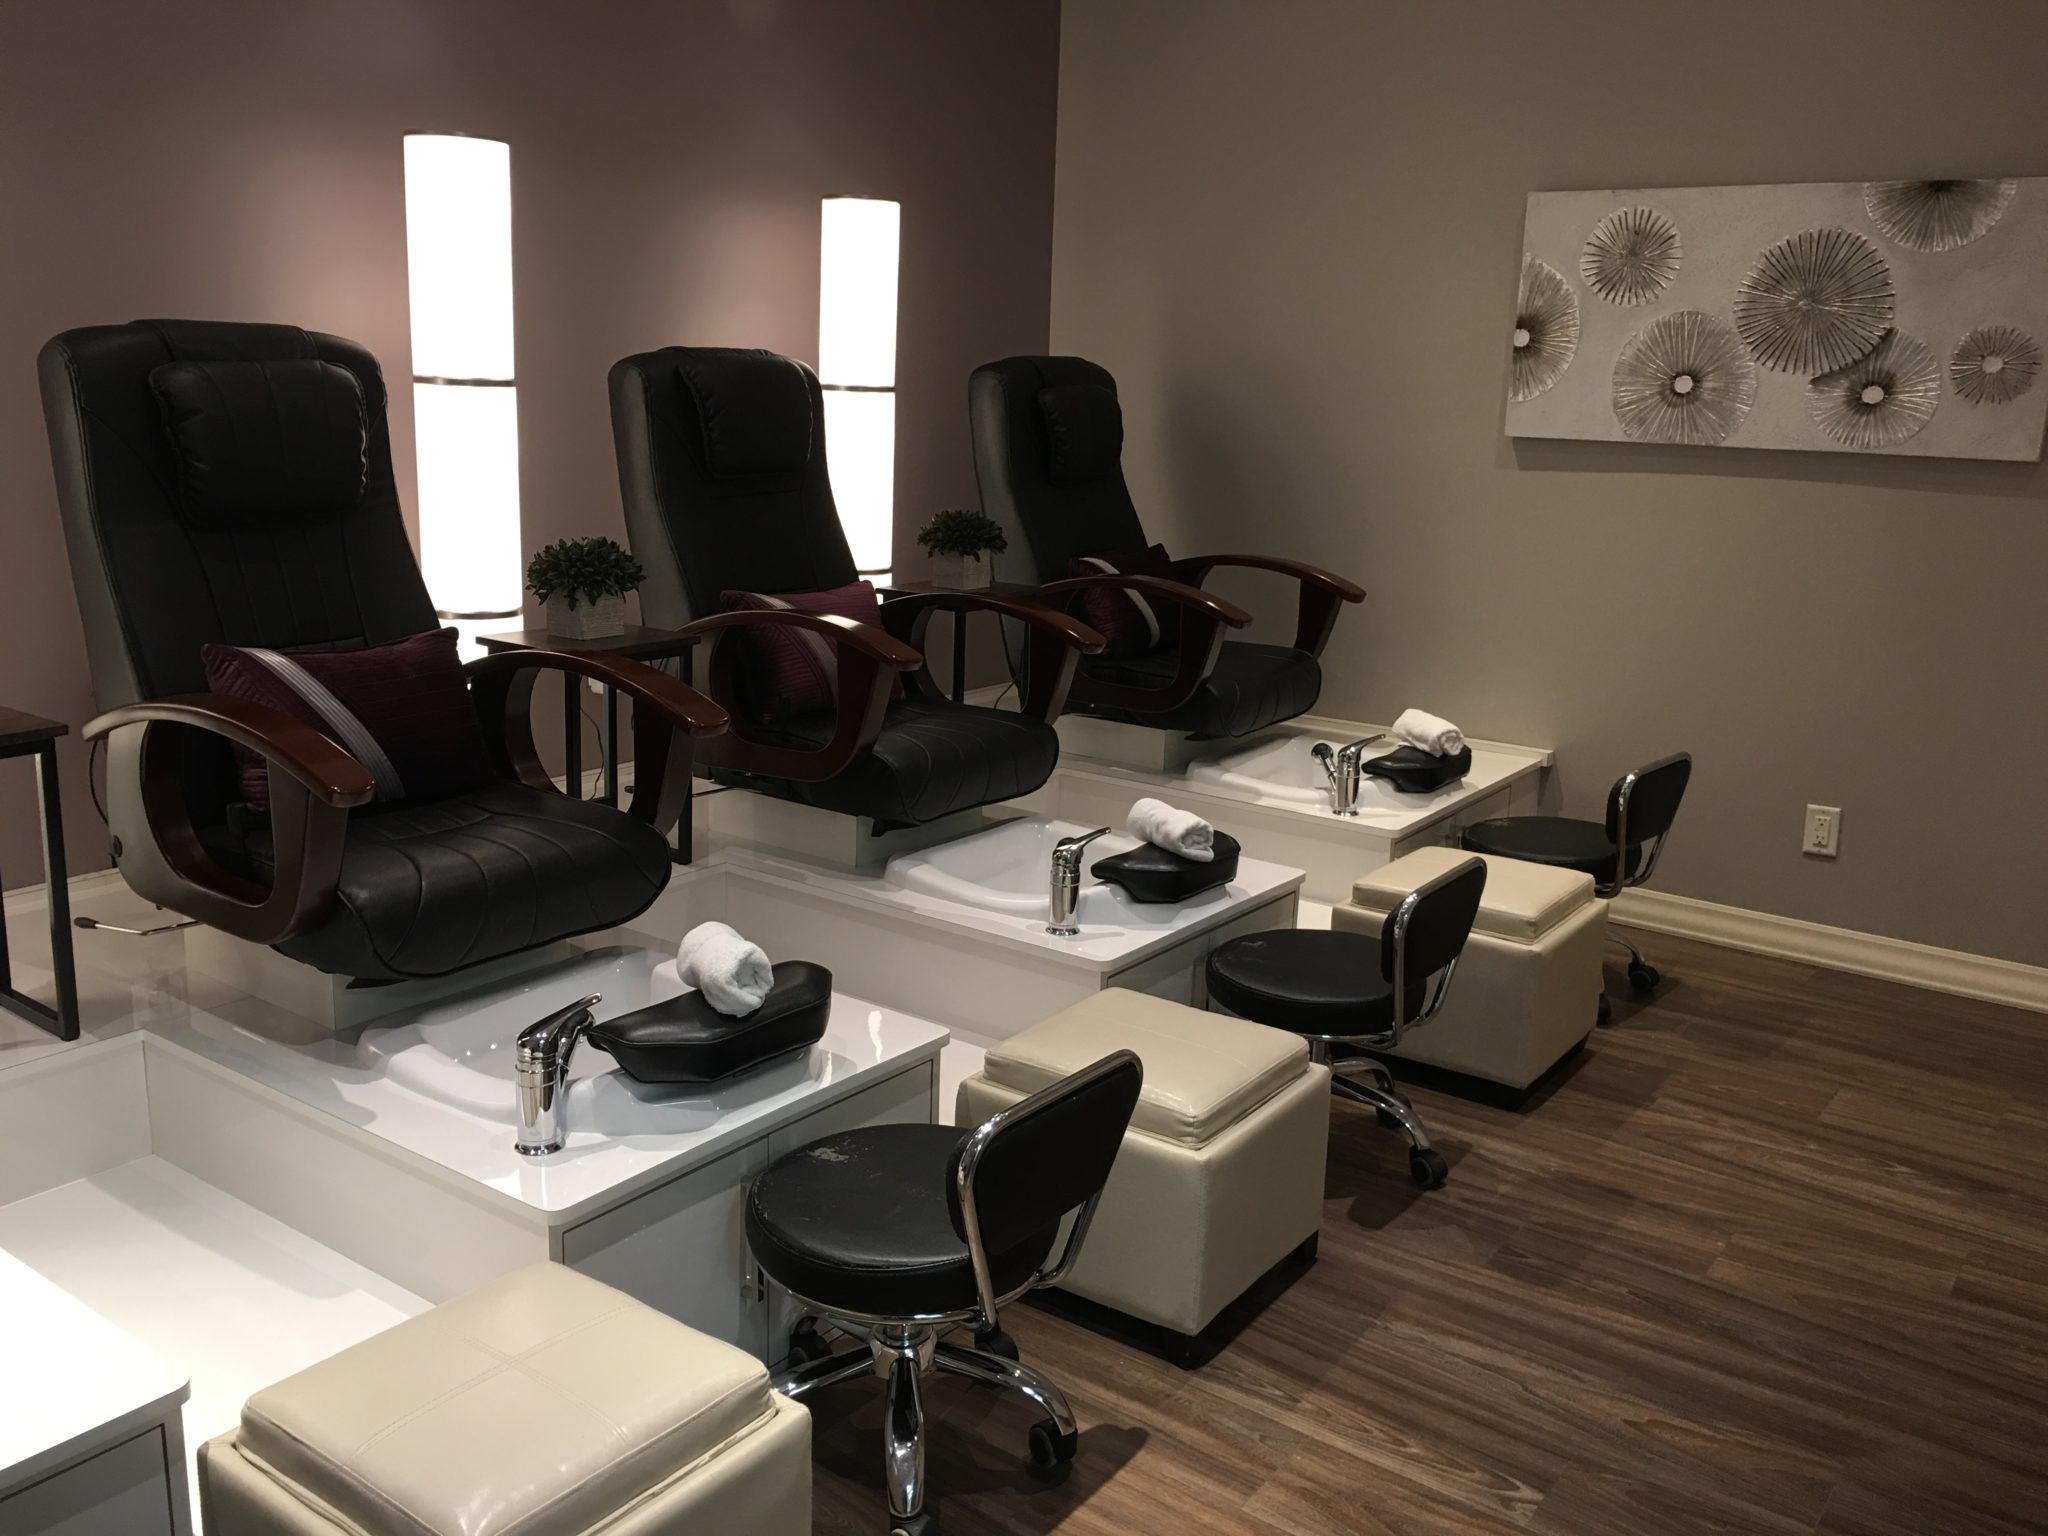 Our pedicure room